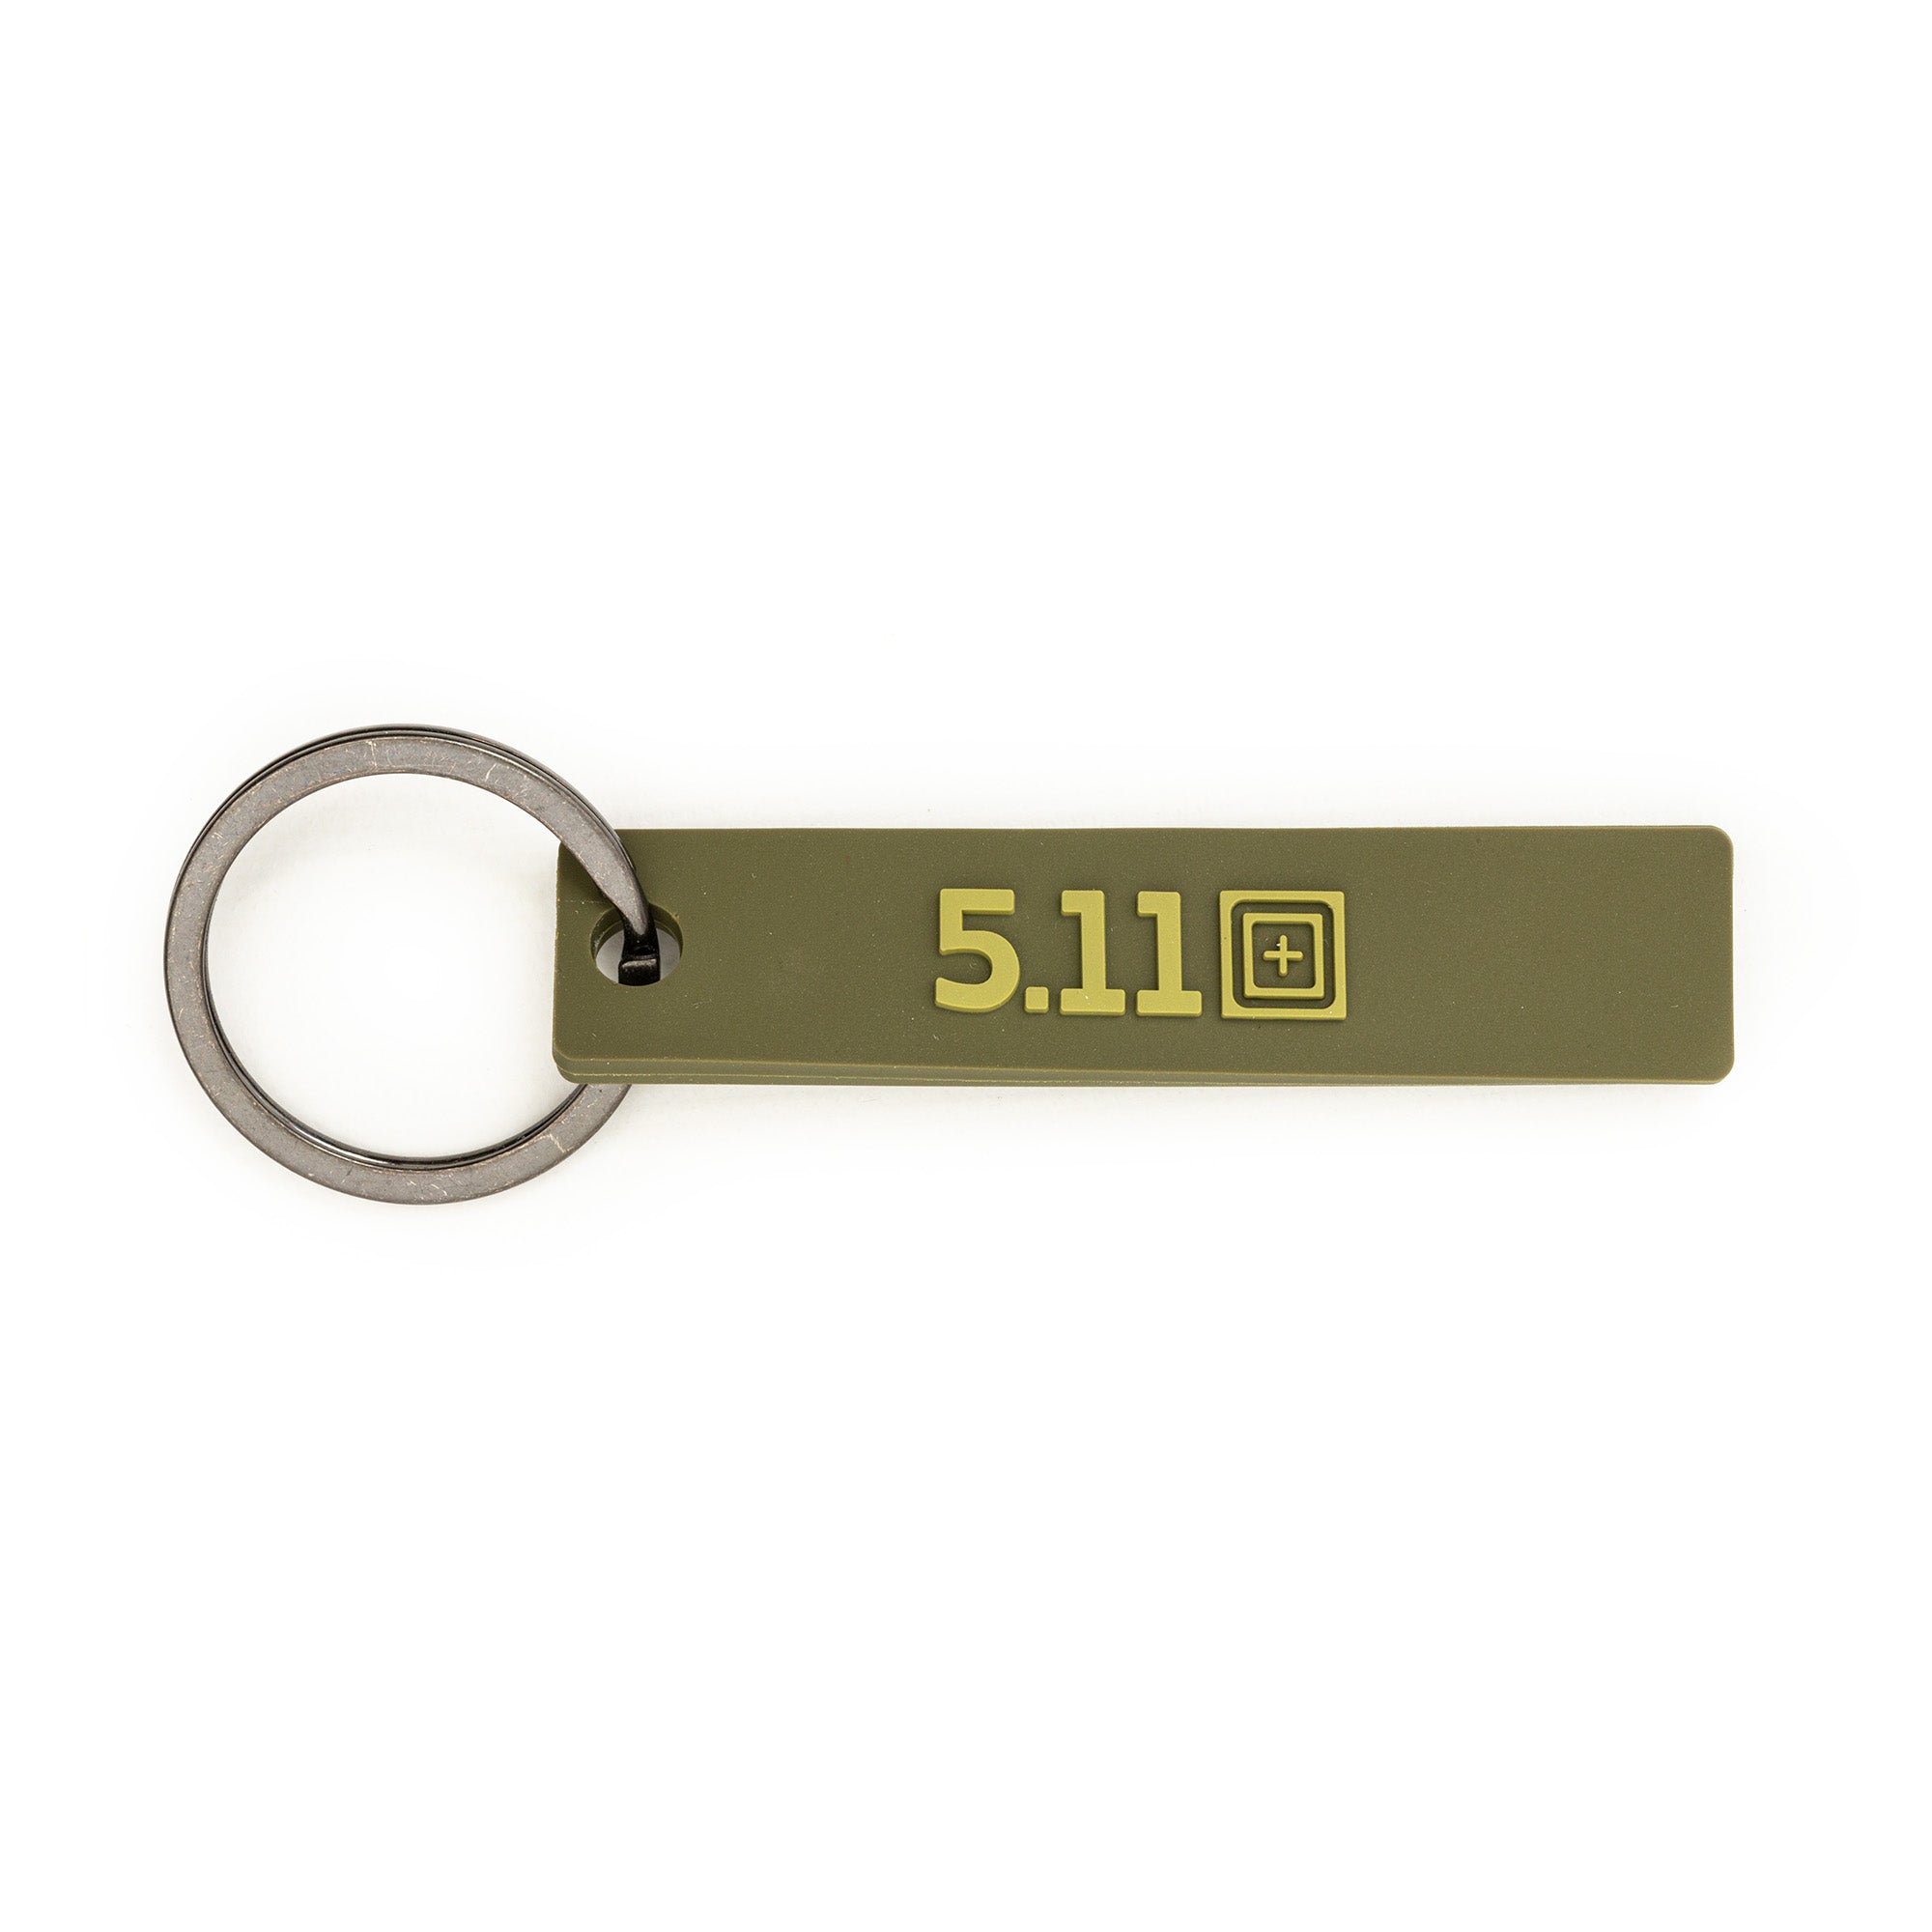 5.11 Tactical You'll Survive Keychain Accessories 5.11 Tactical Tactical Gear Supplier Tactical Distributors Australia